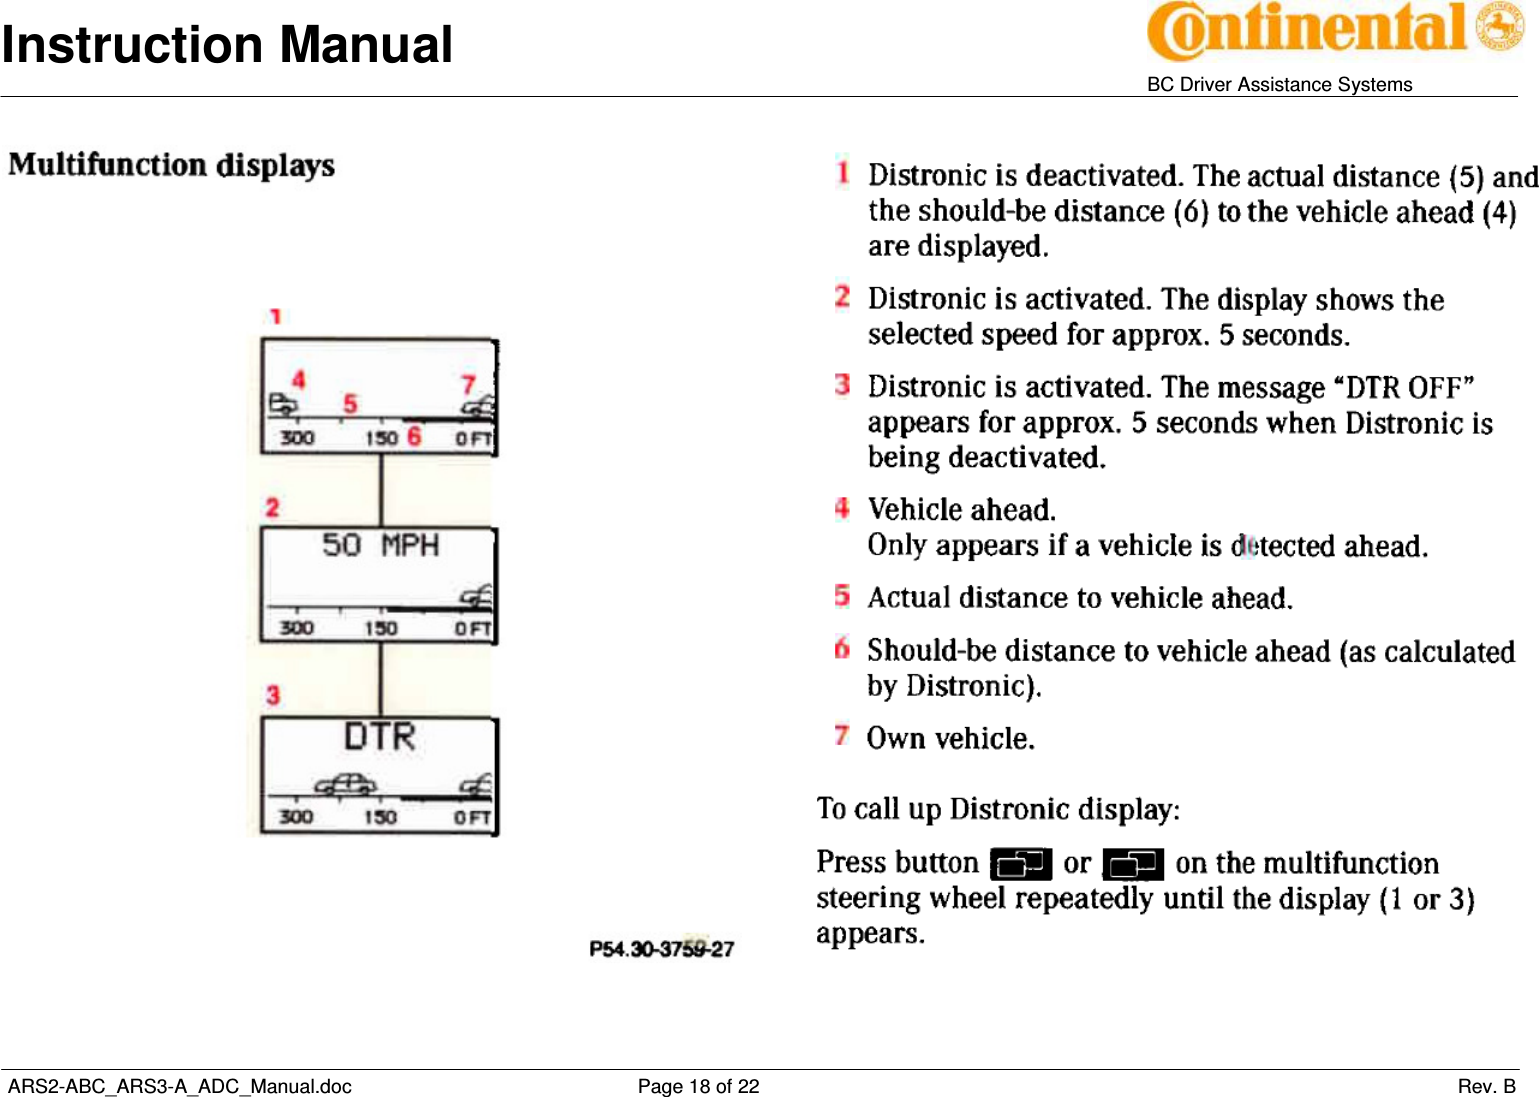 Instruction Manual   BC Driver Assistance Systems  ARS2-ABC_ARS3-A_ADC_Manual.doc     Page 18 of 22                 Rev. B   